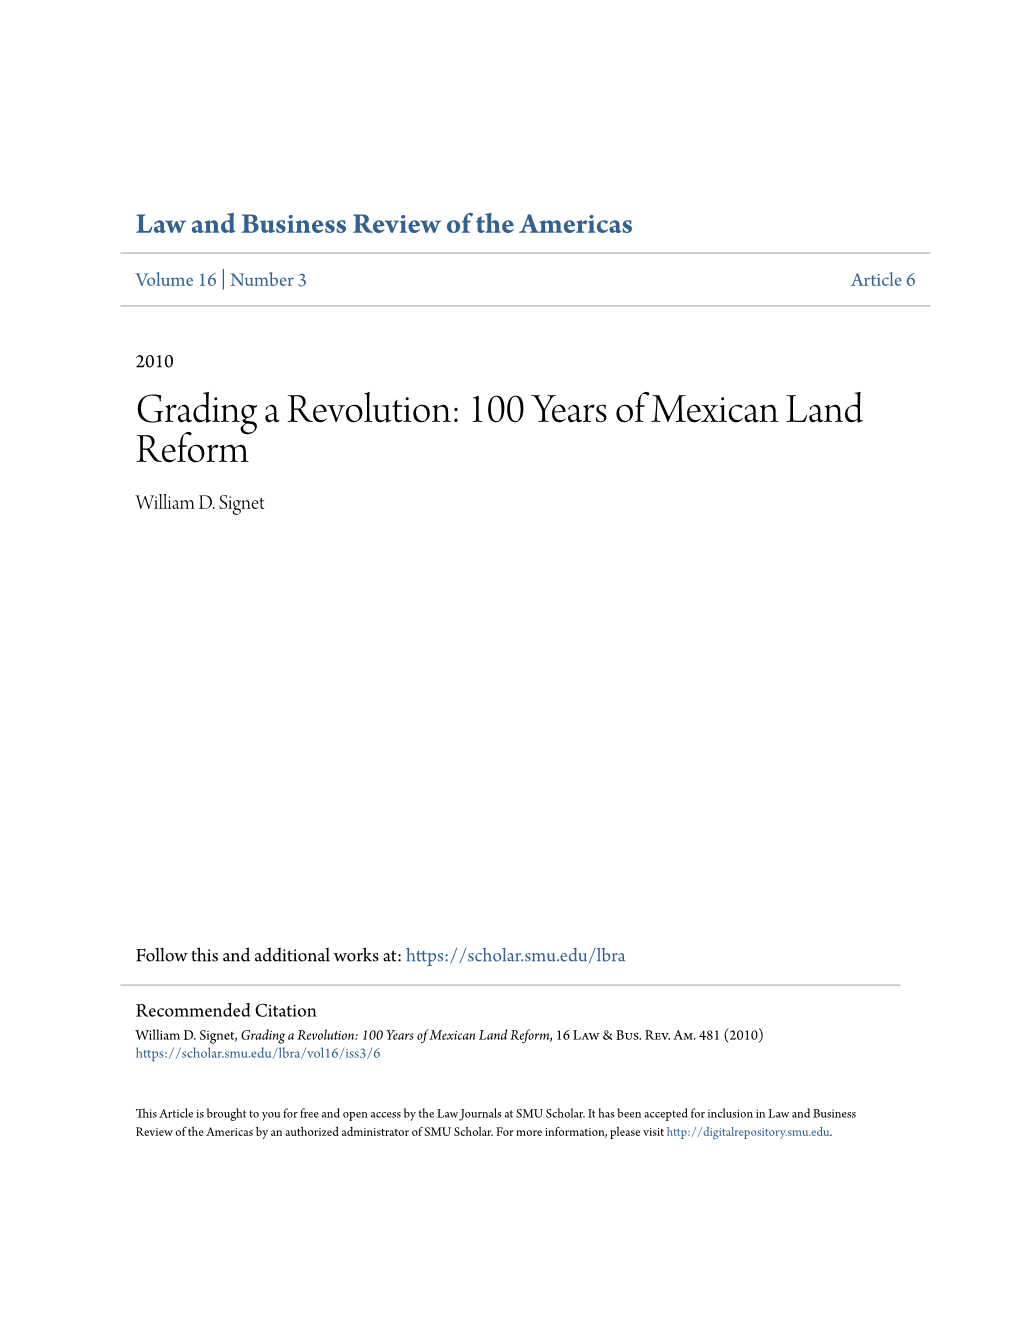 100 Years of Mexican Land Reform William D